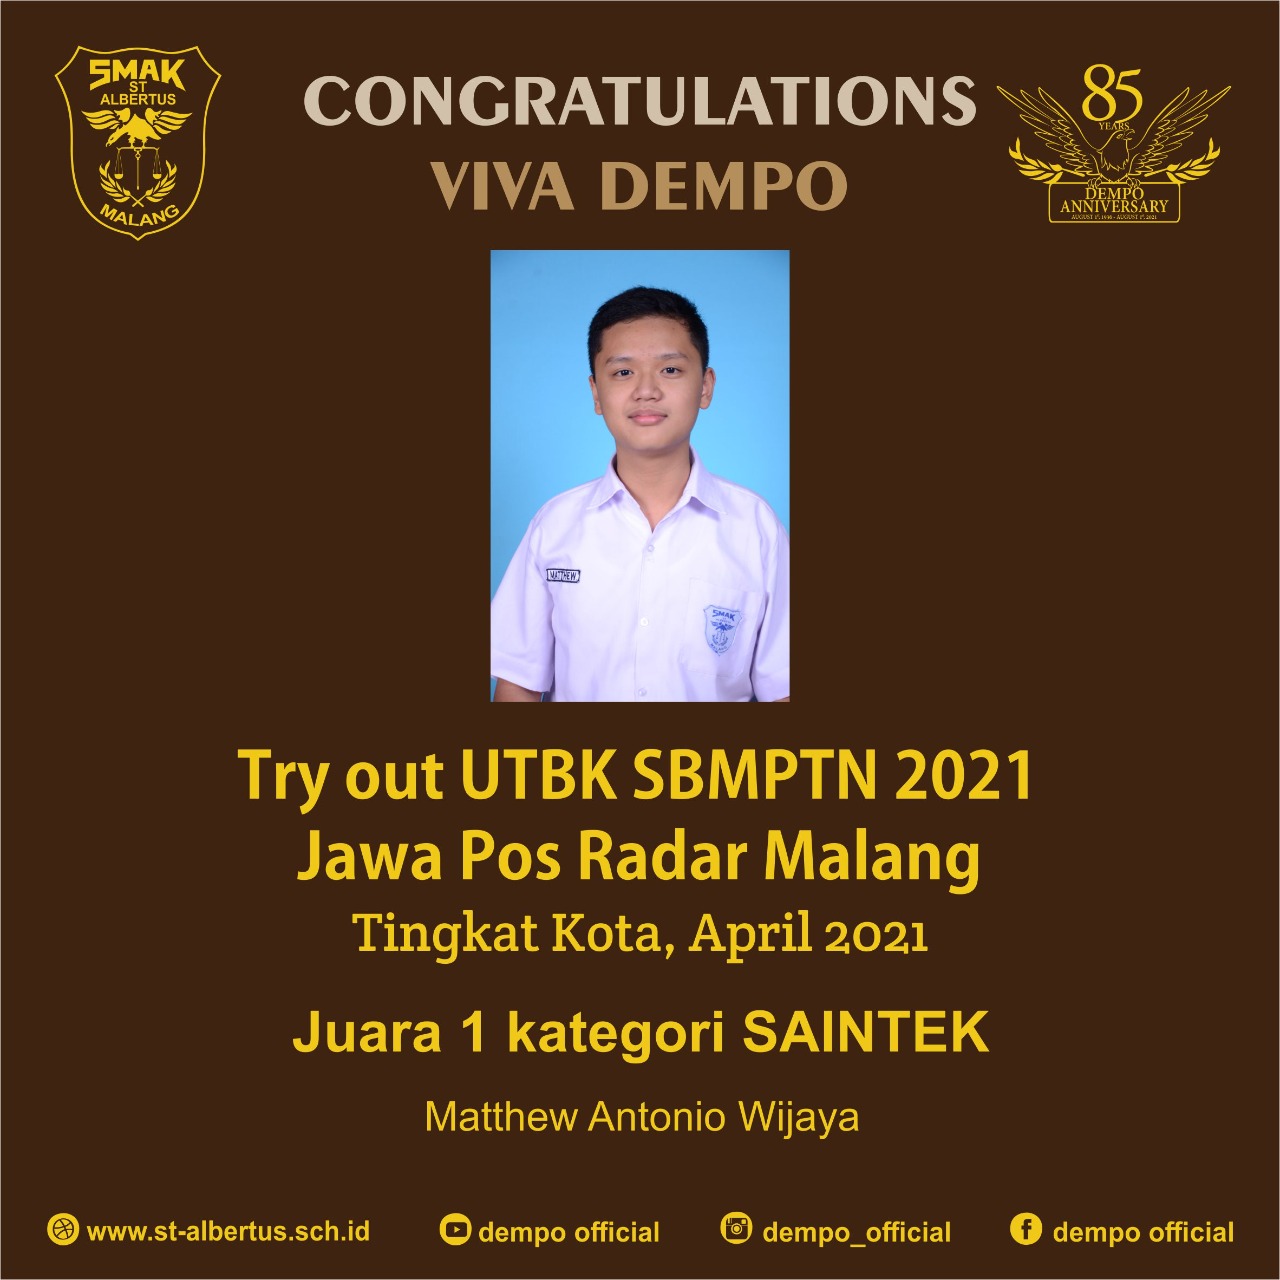 TRY OUT UTBK SBMPTN 2021